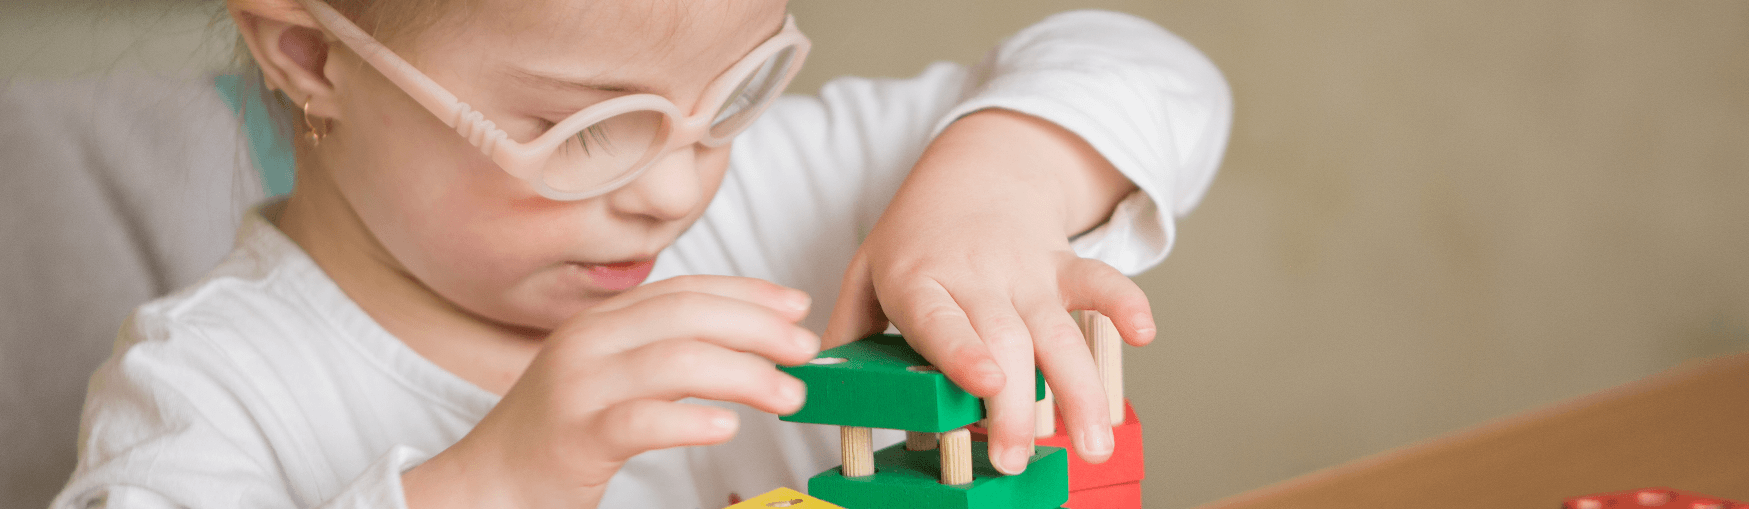 Toddler wearing glasses playing with blocks